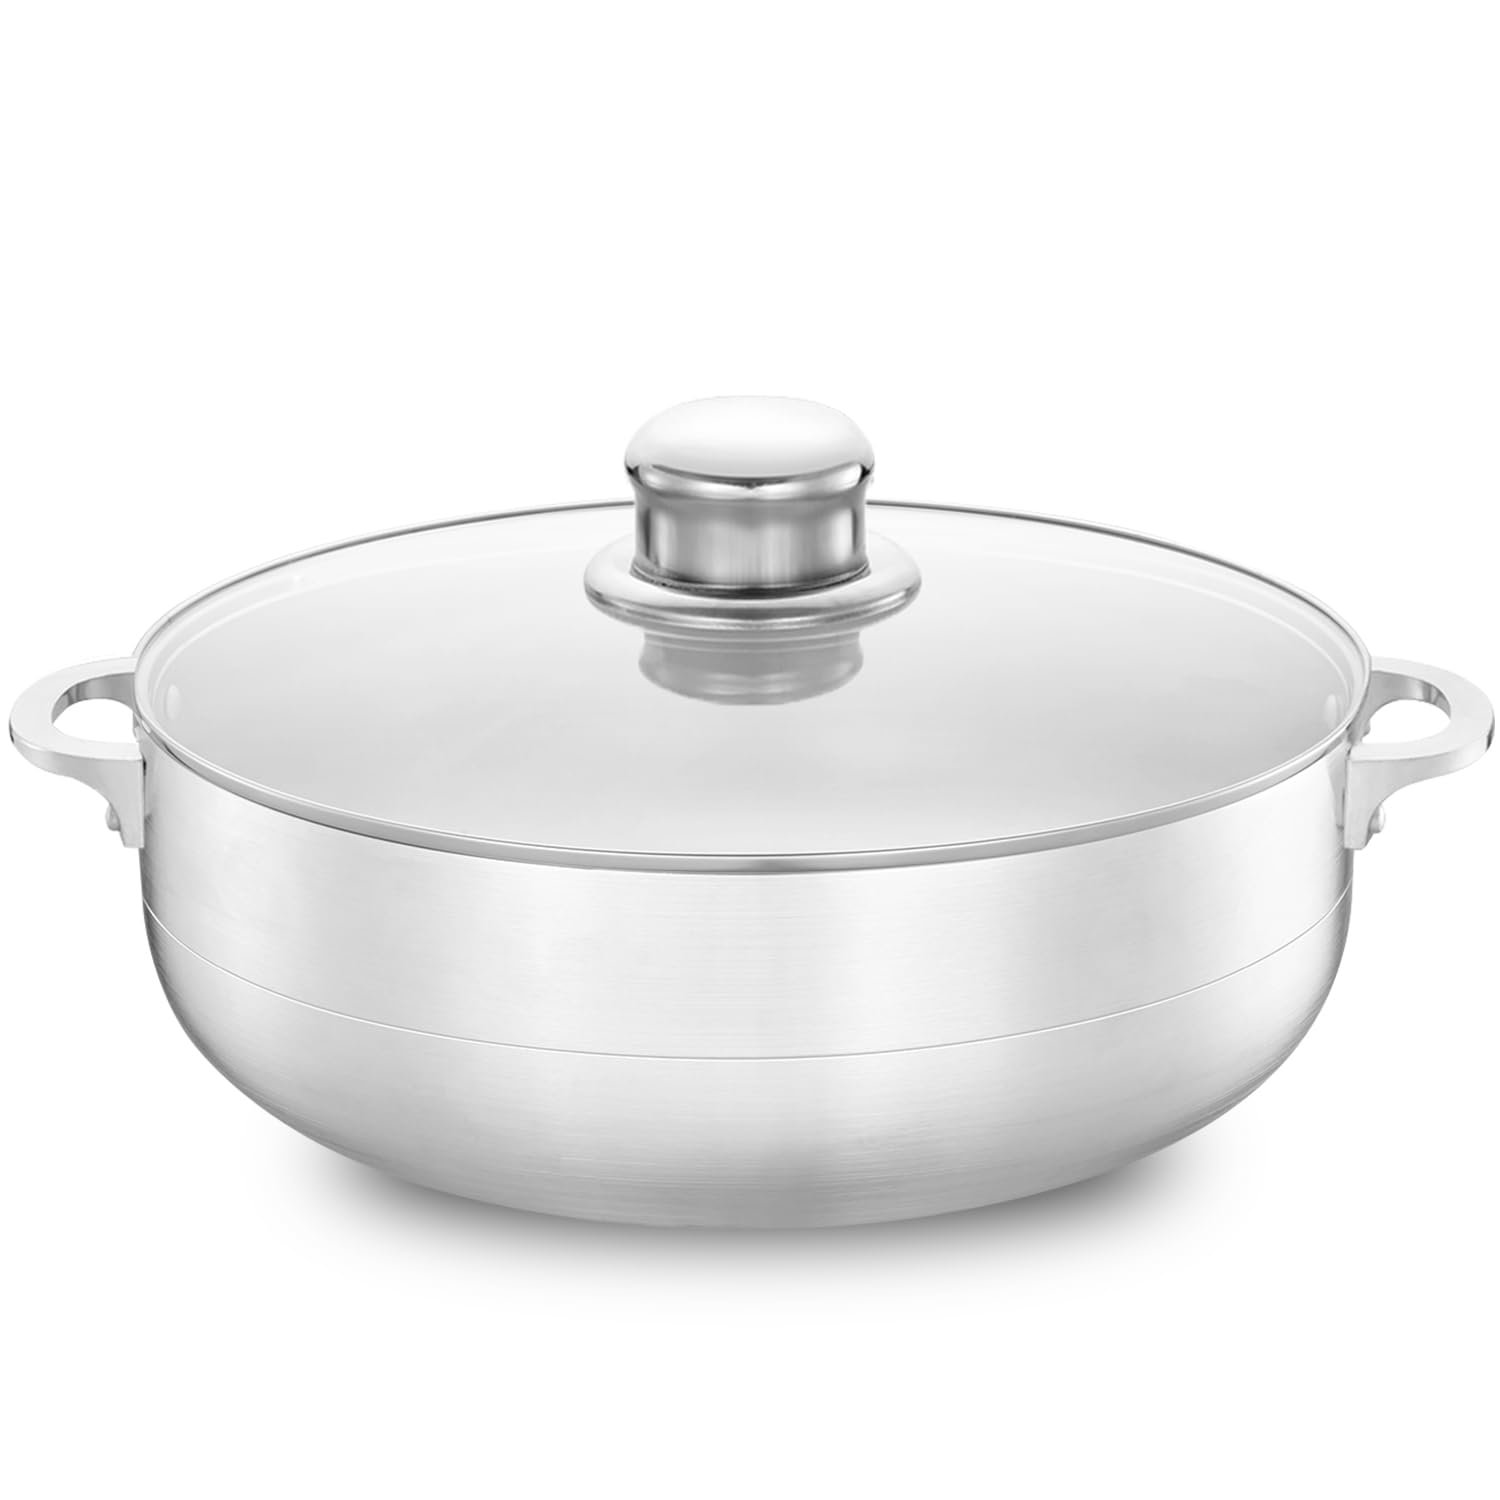 Alpine Cuisine Stainless Steel Dutch Oven with Lid & Easy Cool